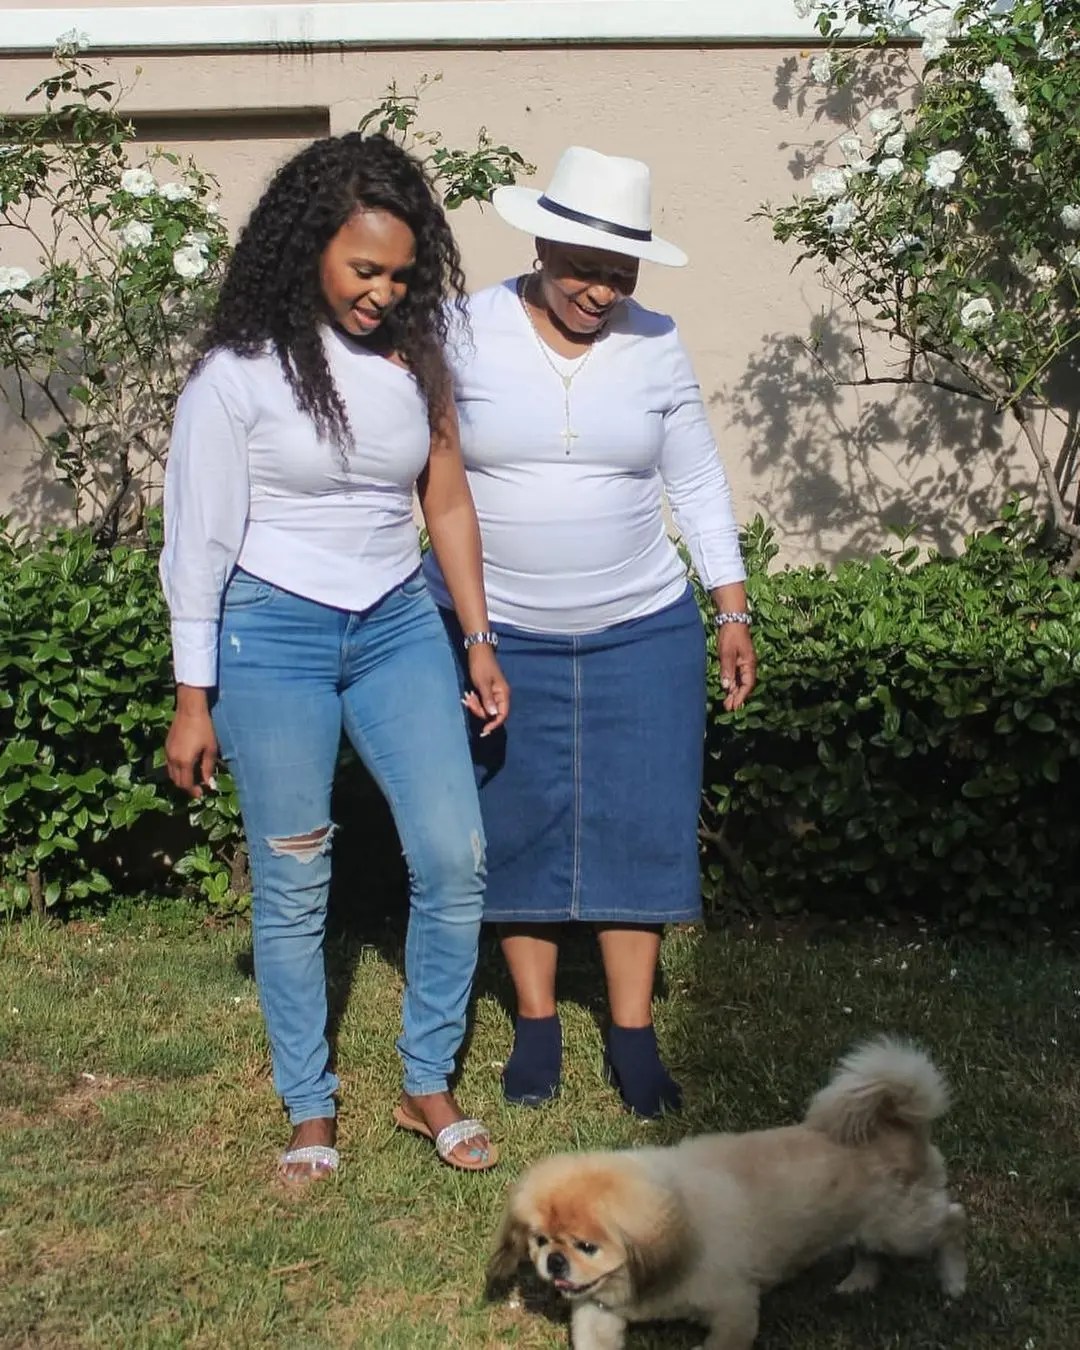 Actress Katlego Danke pens a sweet note as she celebrates her mom’s birthday